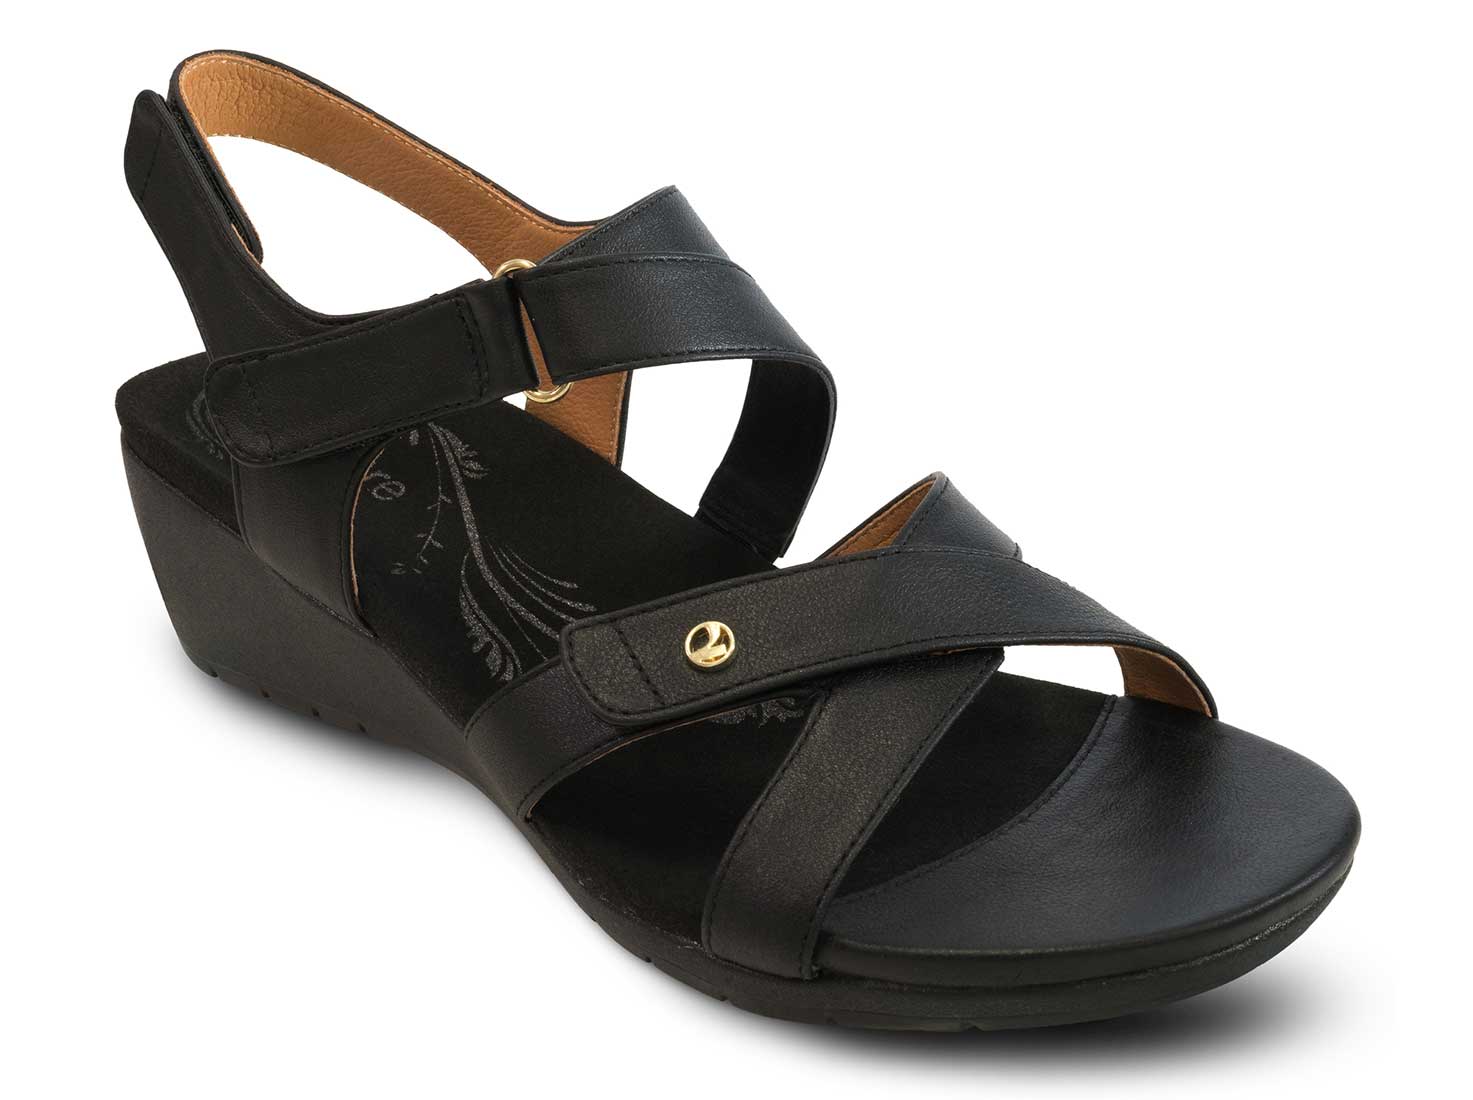 Revere Casablanca - Women's Sandal - Medium - Extra Depth With Removable Foot Beds